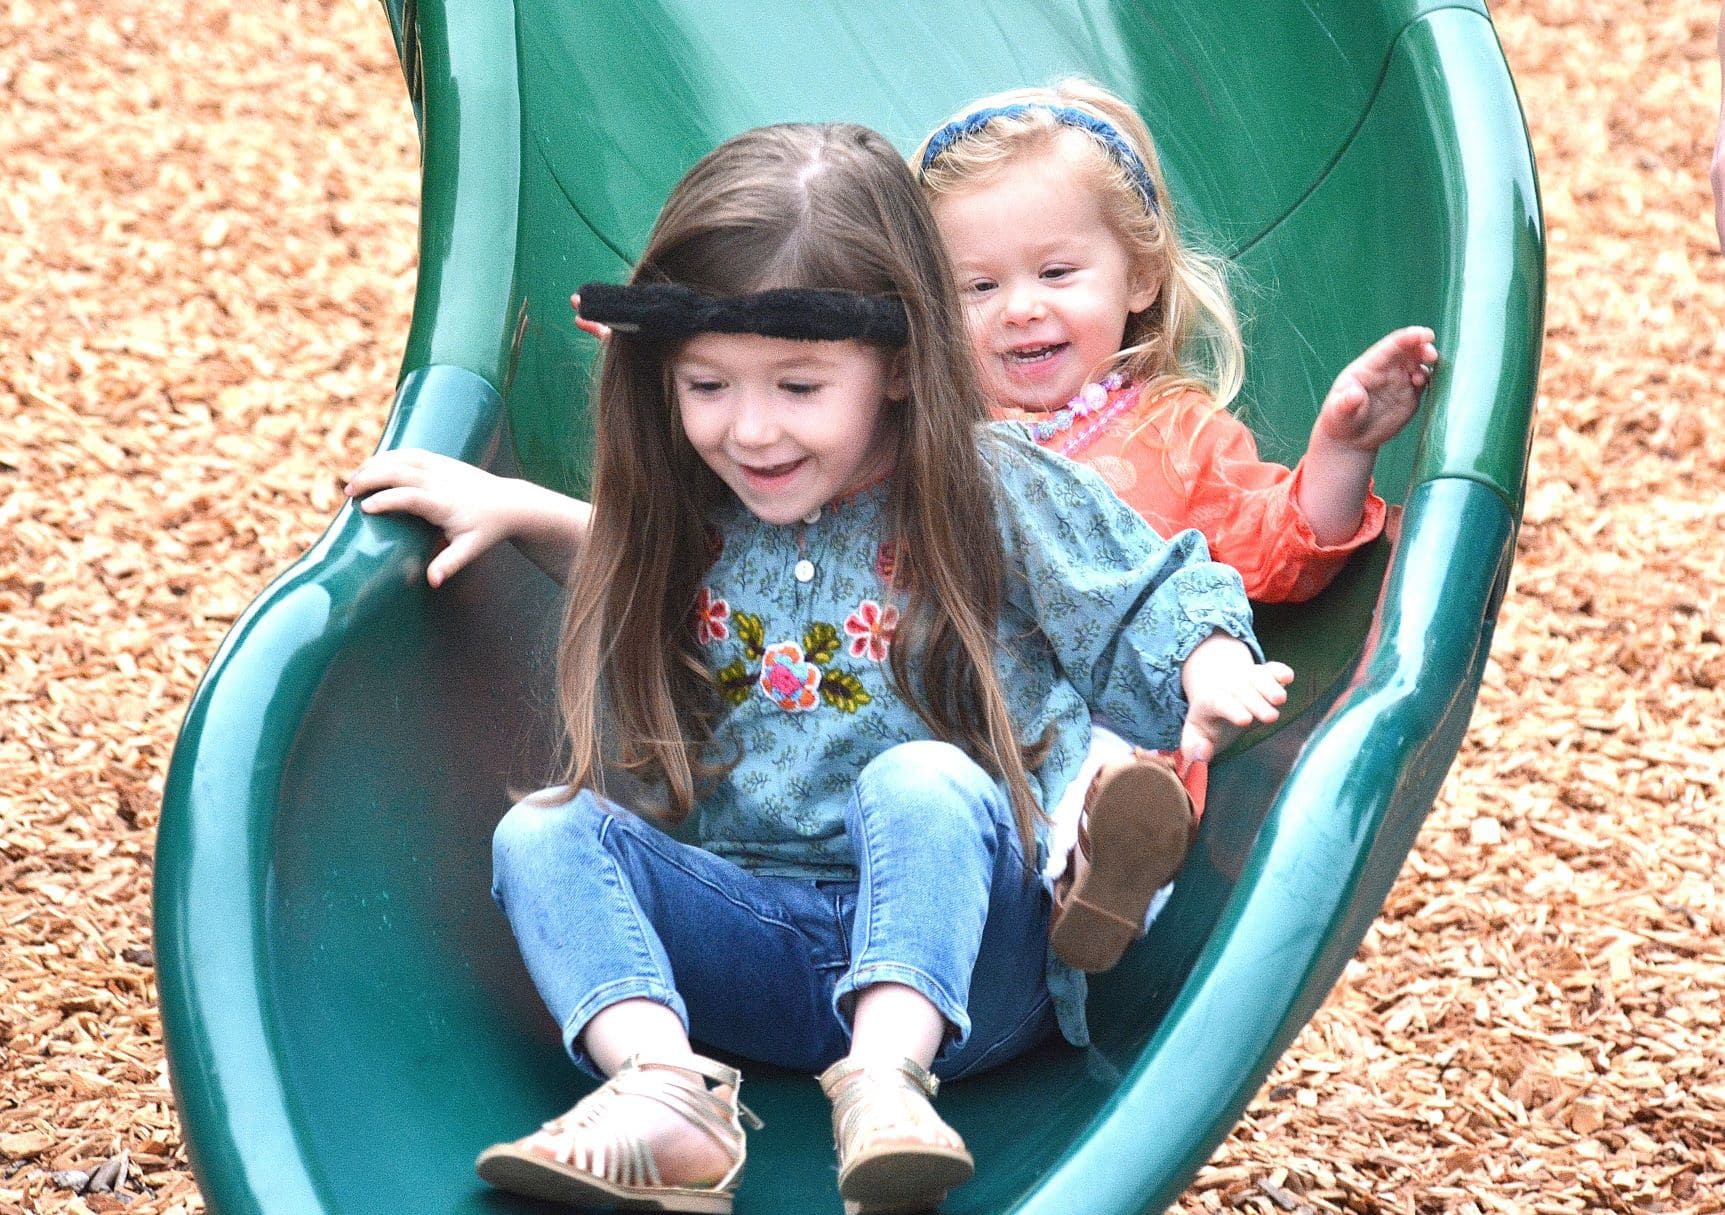 The Black sisters – Kiley, 4, and Maeve, 2 – glide to the end of the slide.